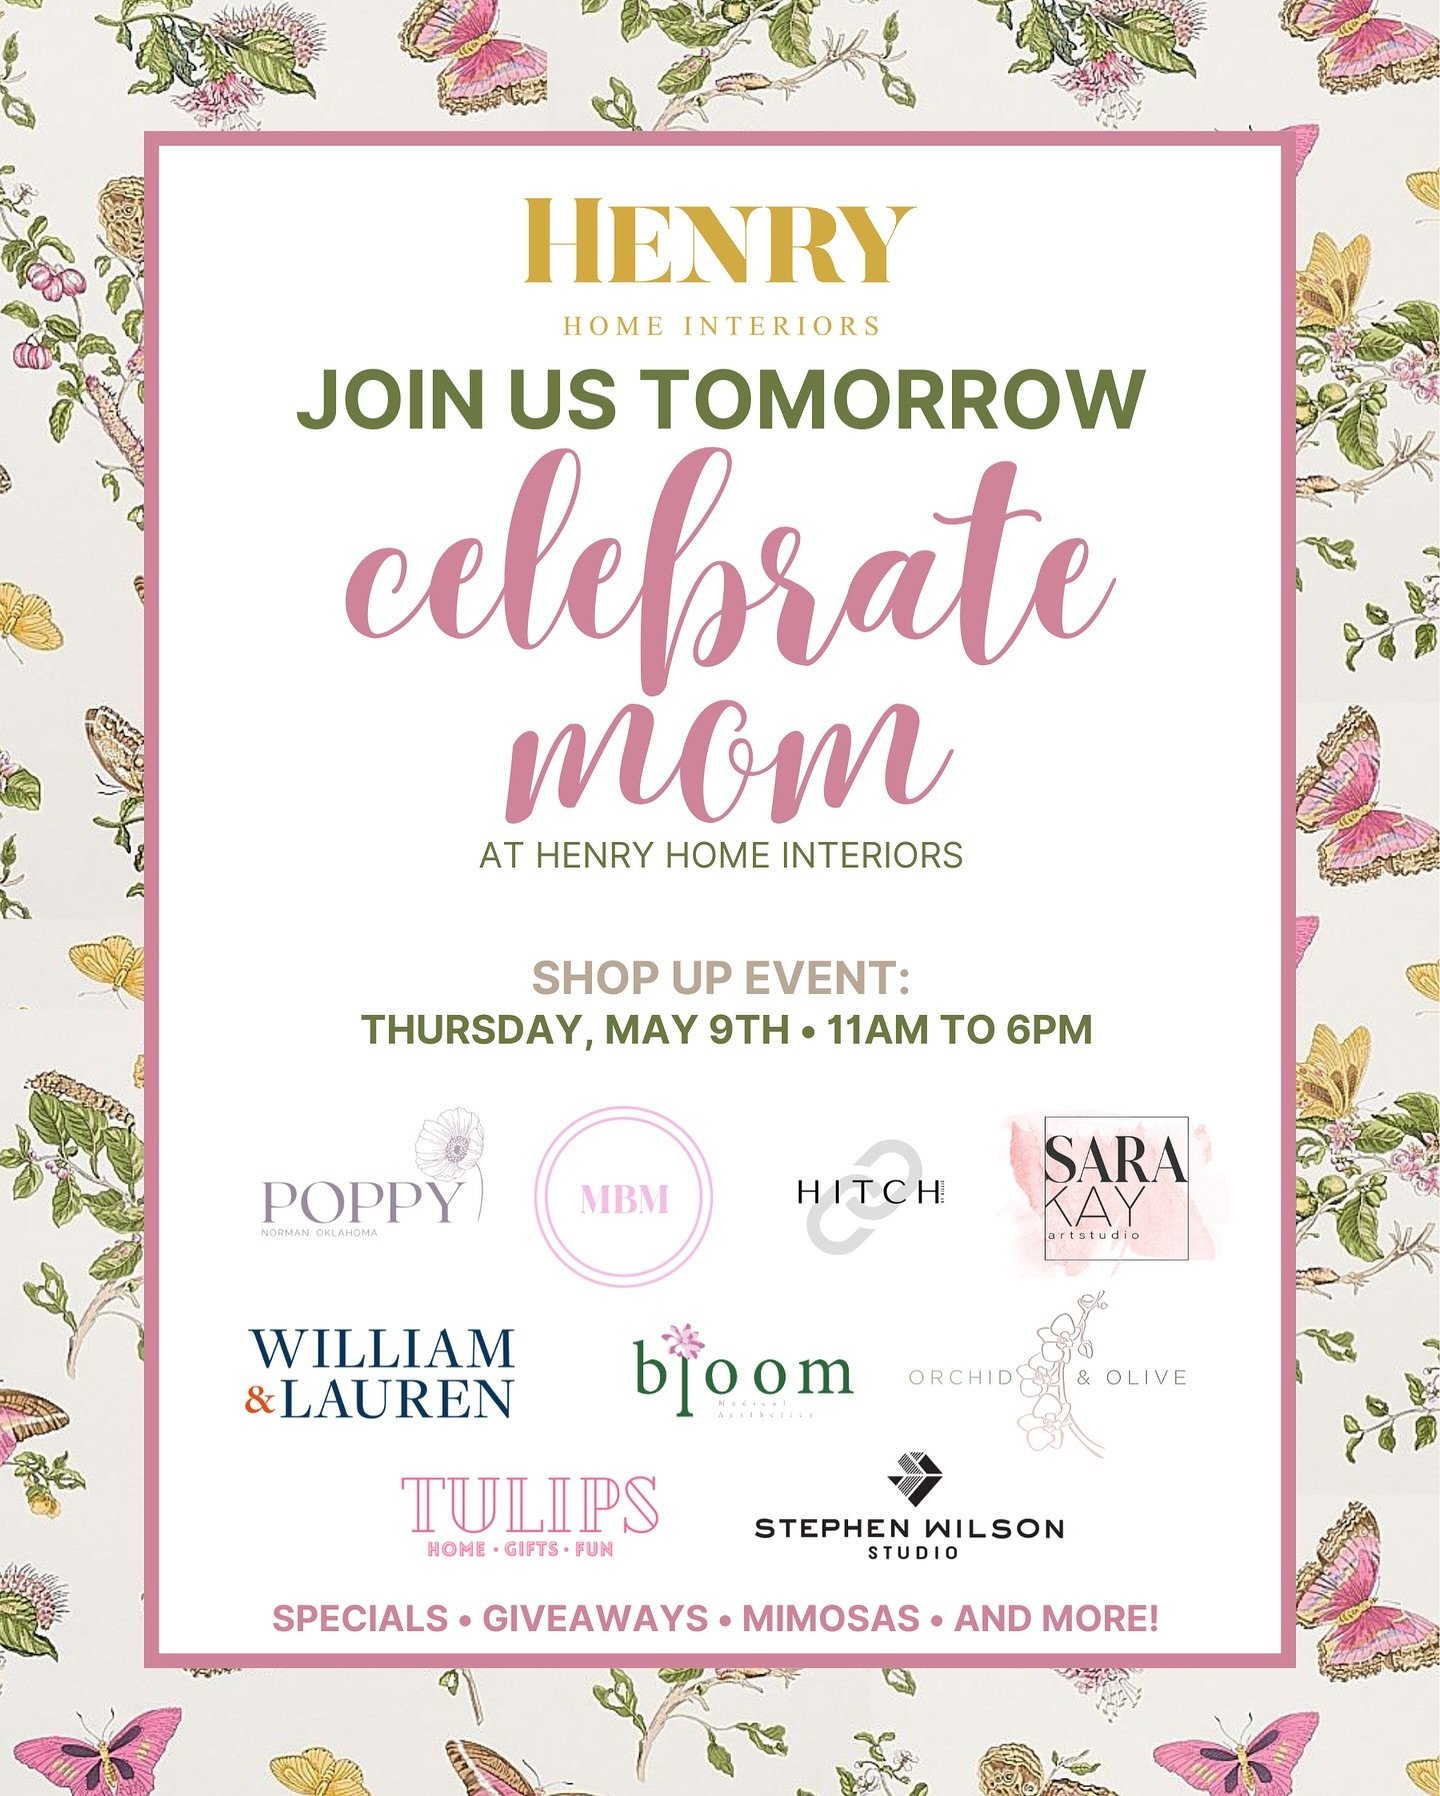 We can&rsquo;t wait to see you and help you pick out something fabulous for MOM tomorrow Thursday, May 9th 11am to 6pm!! 💕 Our pop up shops have put together an amazing giveaway too! Think luxury art, jewelry, gift cards and more! ✨🎉 #CelebrateMOM 